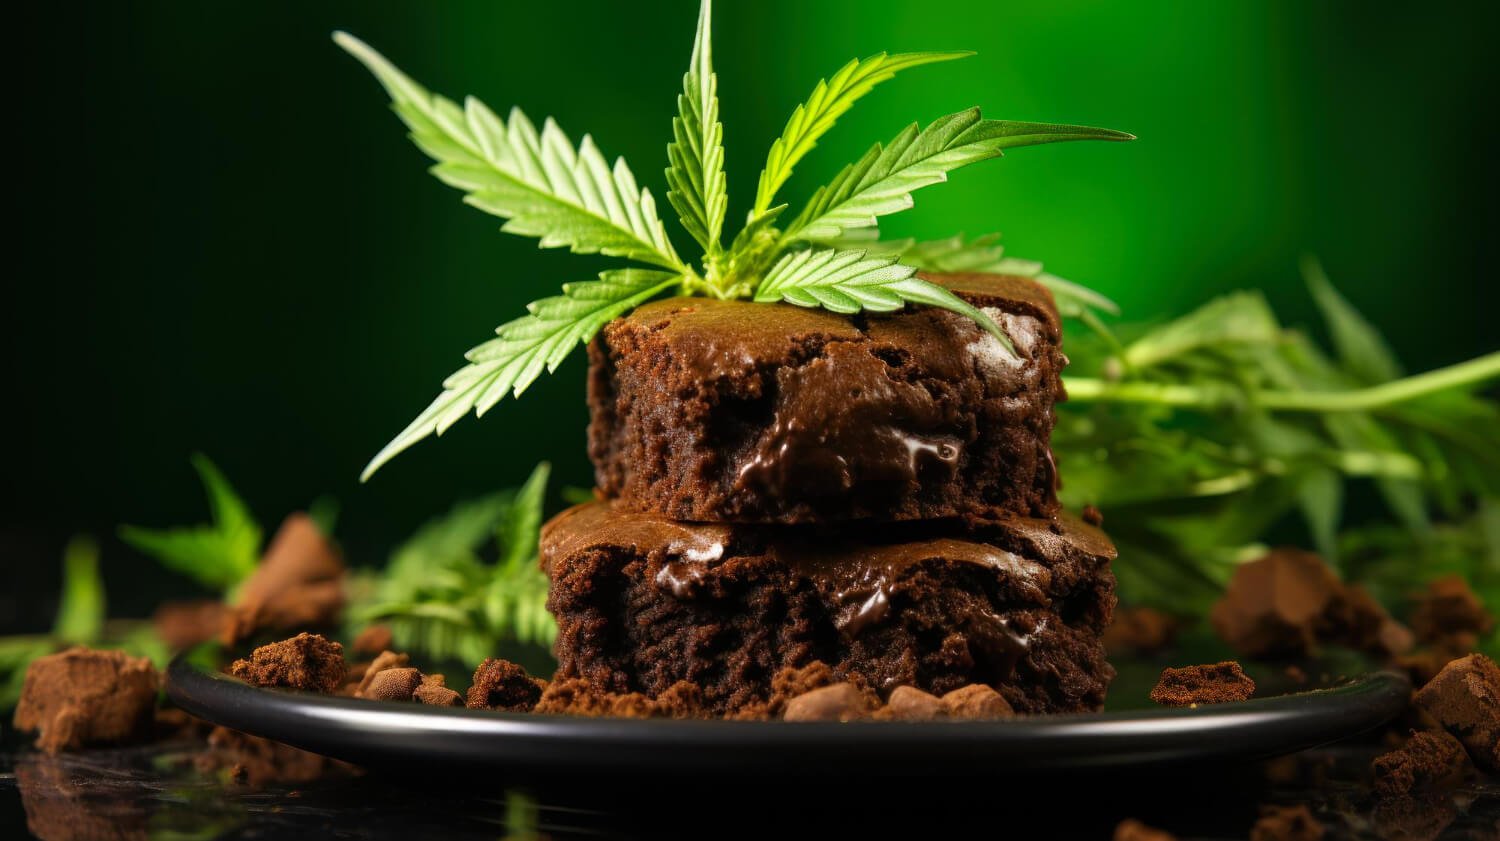 New Jersey's Cannabis Regulatory Commission allows the sale of weed brownies and THC-infused drinks